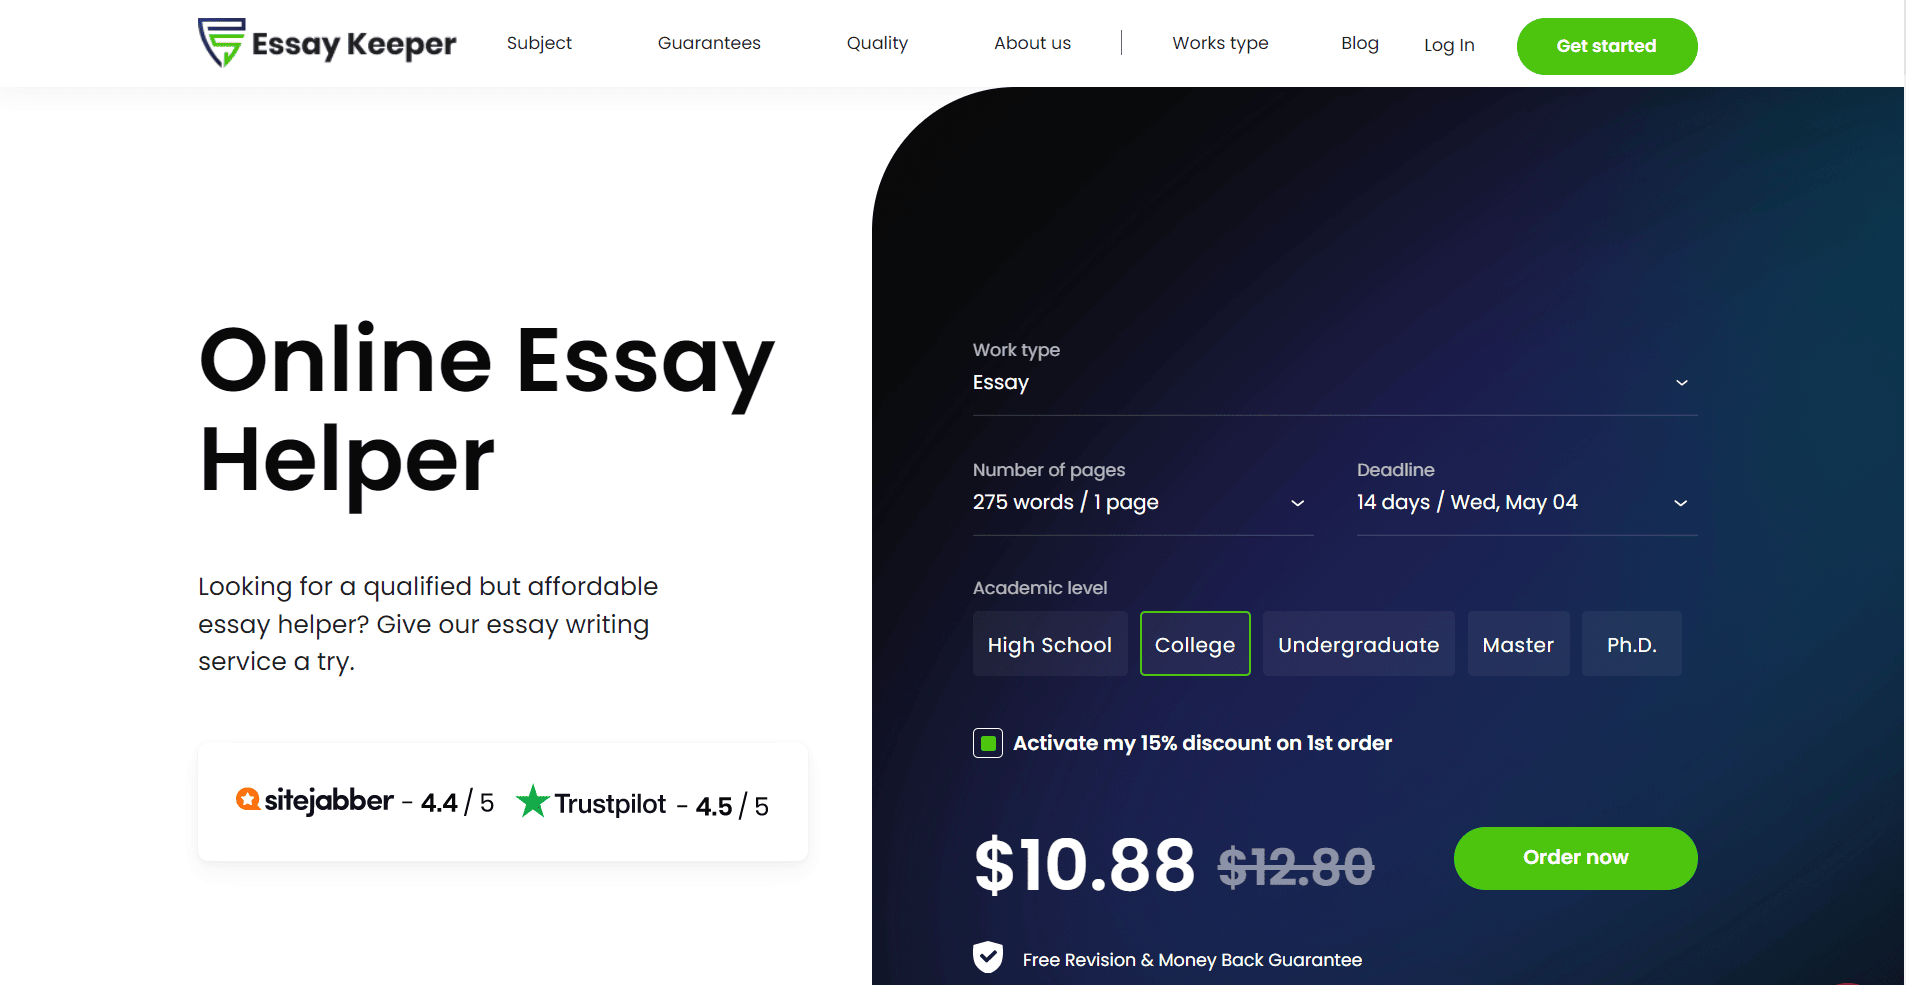 Essay Keeper Review 2022